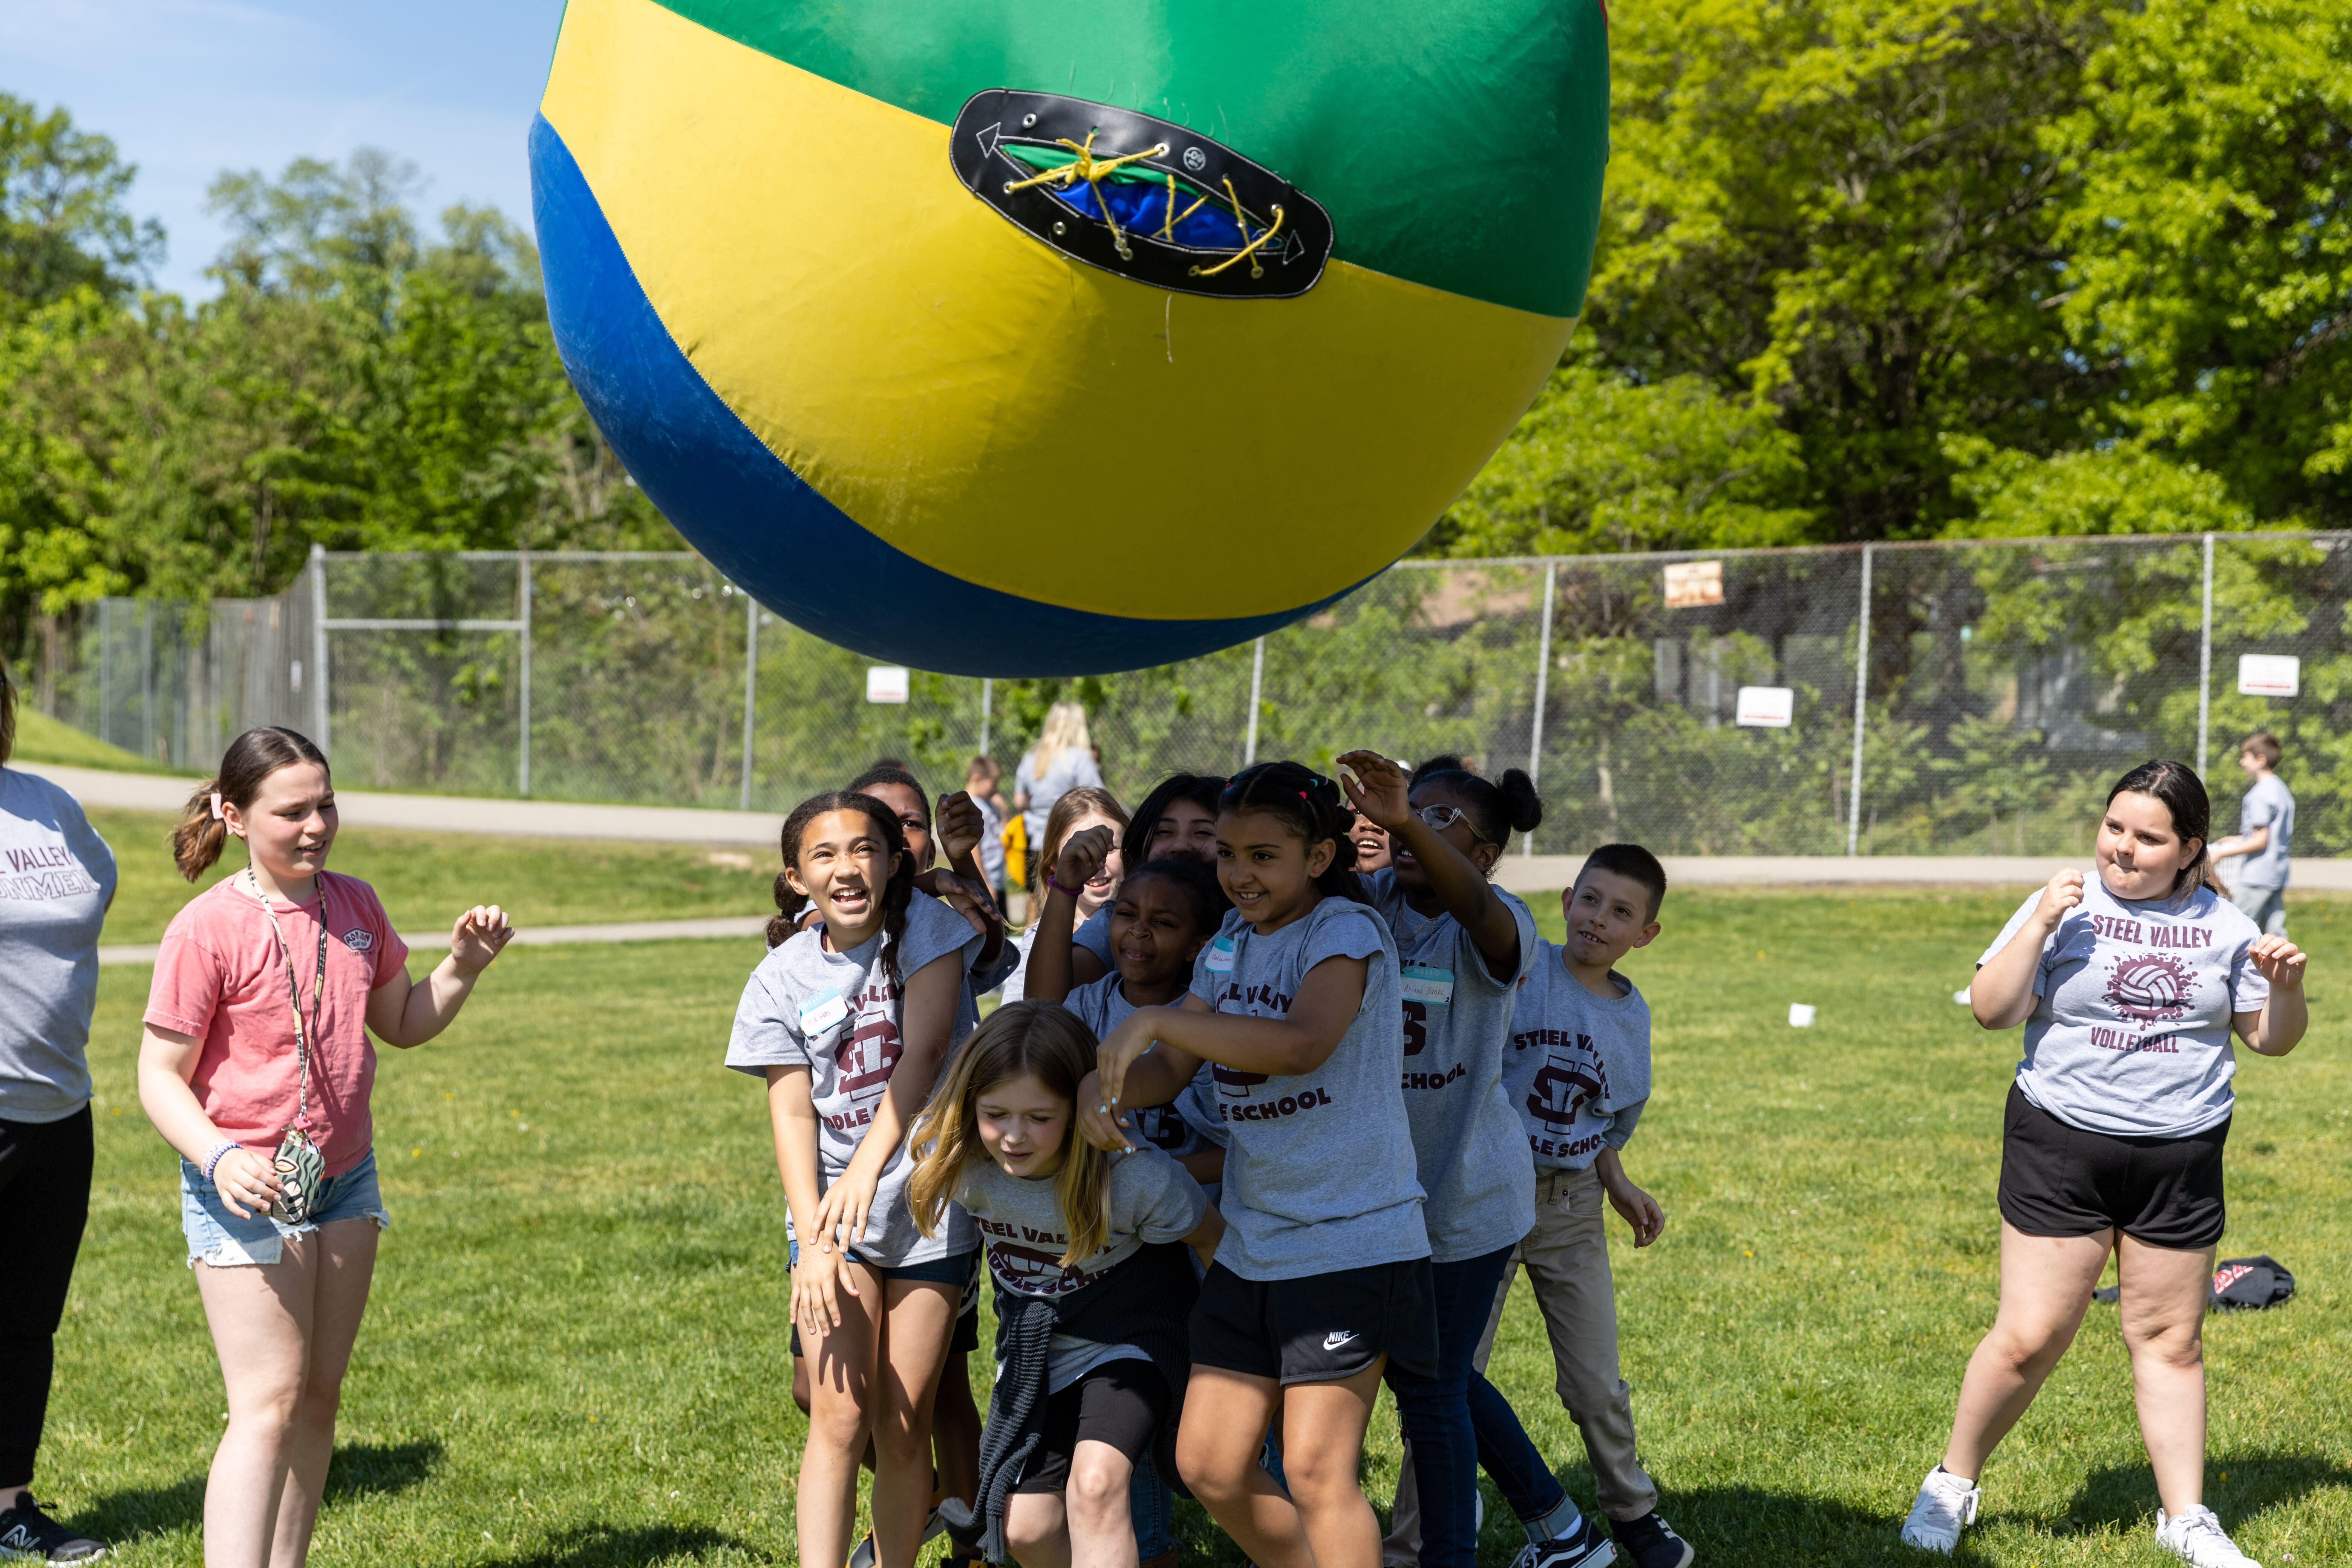 Students work together to throw a massive inflated ball